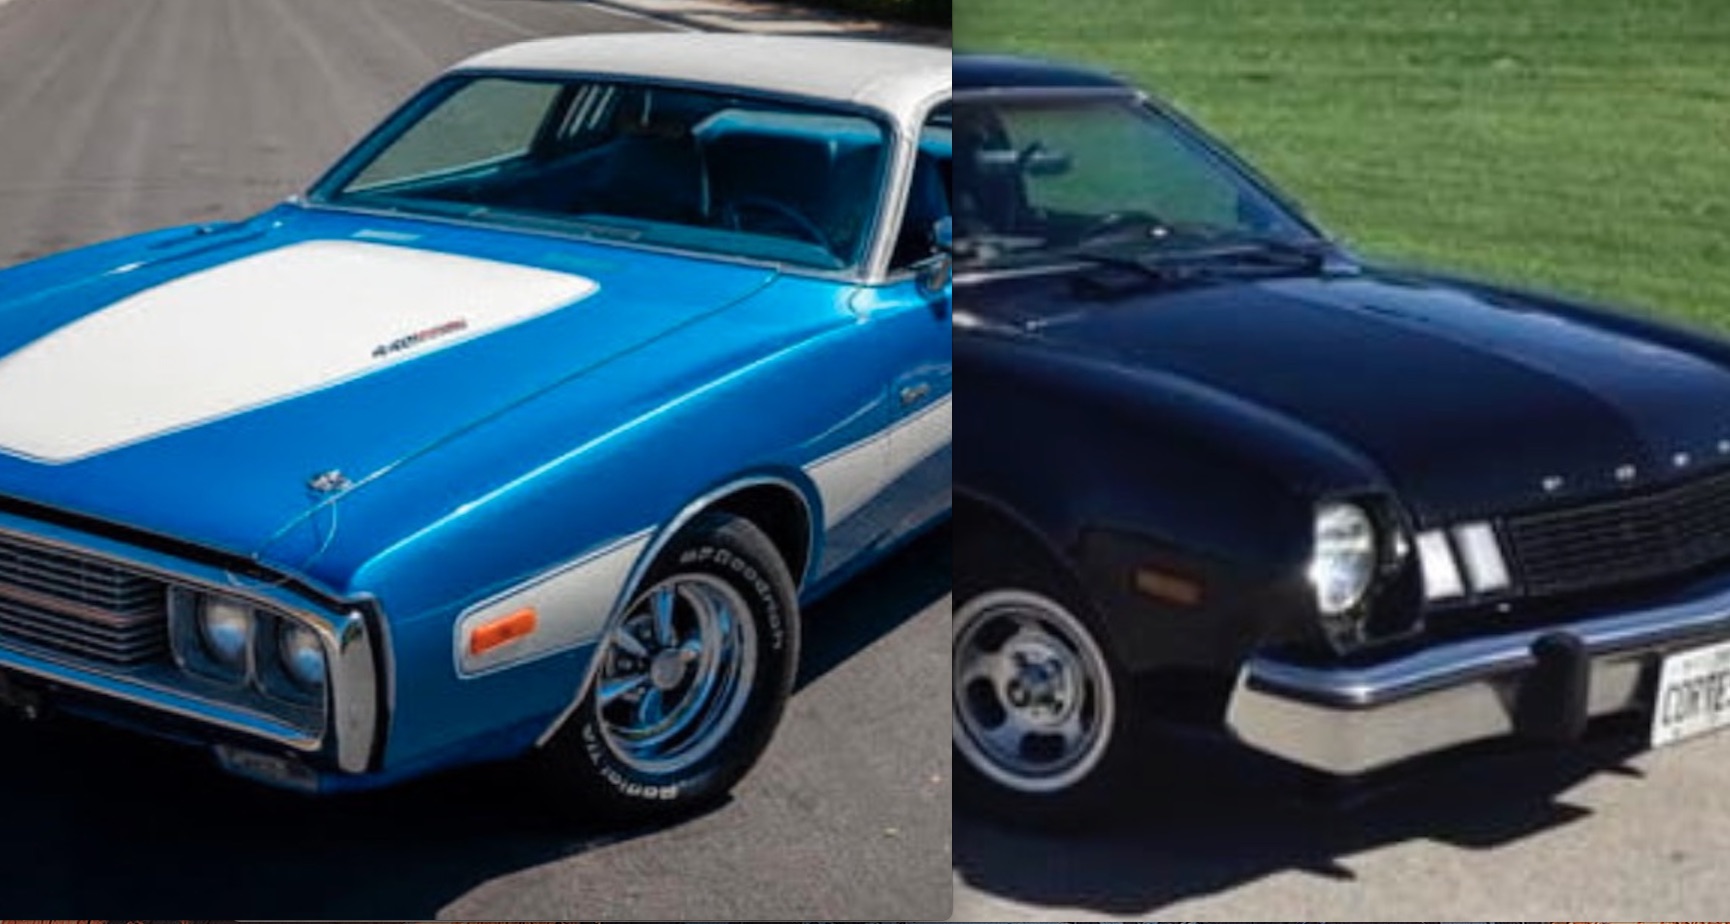 BangShift’s Question Of The Day: Which Of These Two Cars Represents The 1970s More?